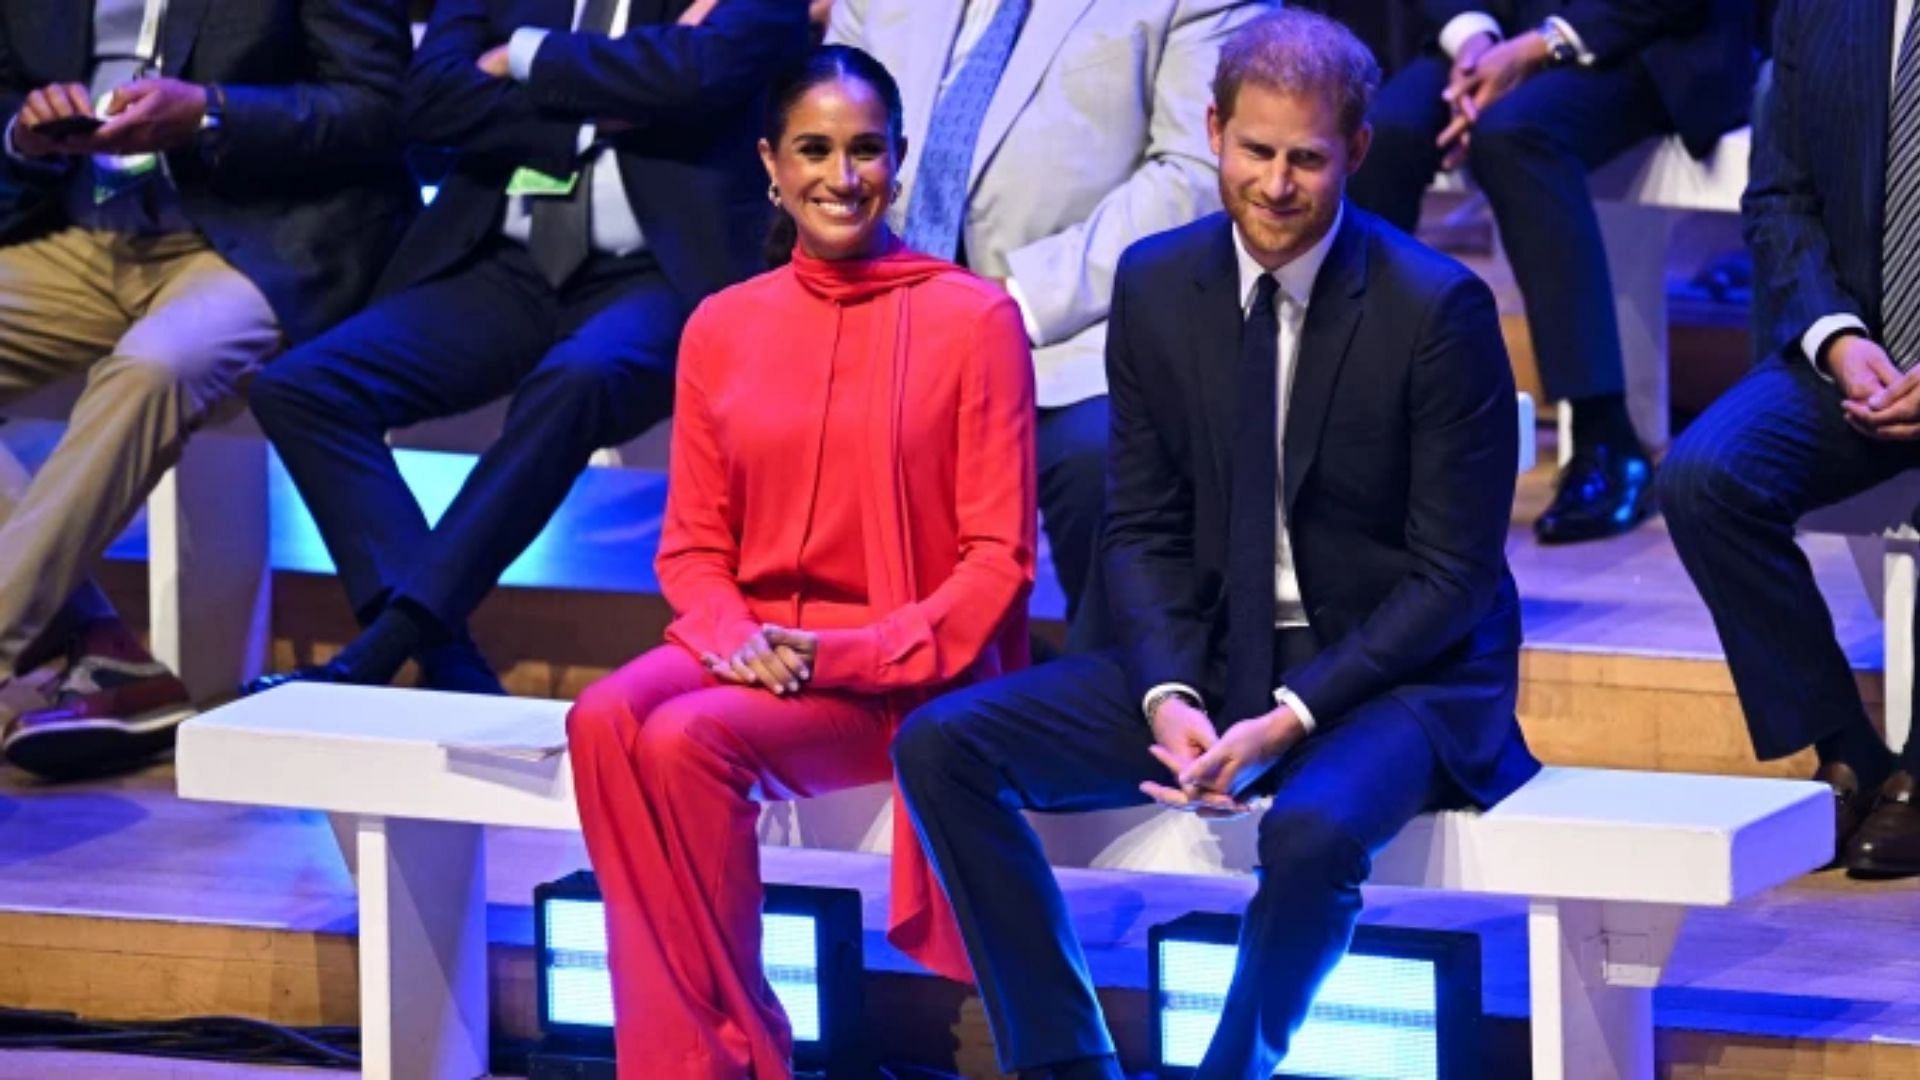 Prince Harry and Meghan Markle recently attended the One Young World Summit in Manchester. (Image via AFP/Getty Images)